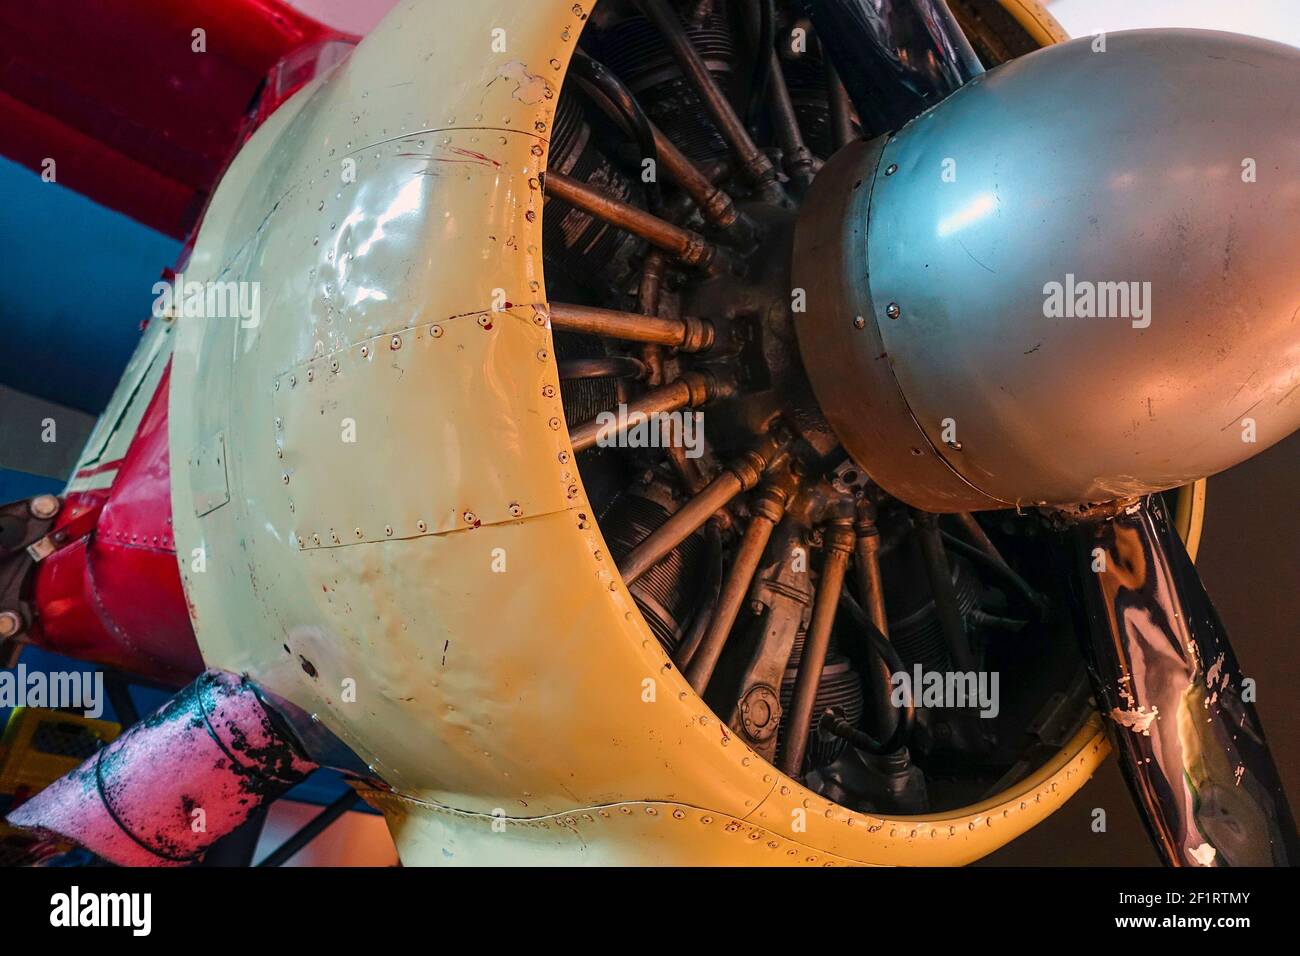 Close-up of the engine of an old propeller aircraft. Stock Photo